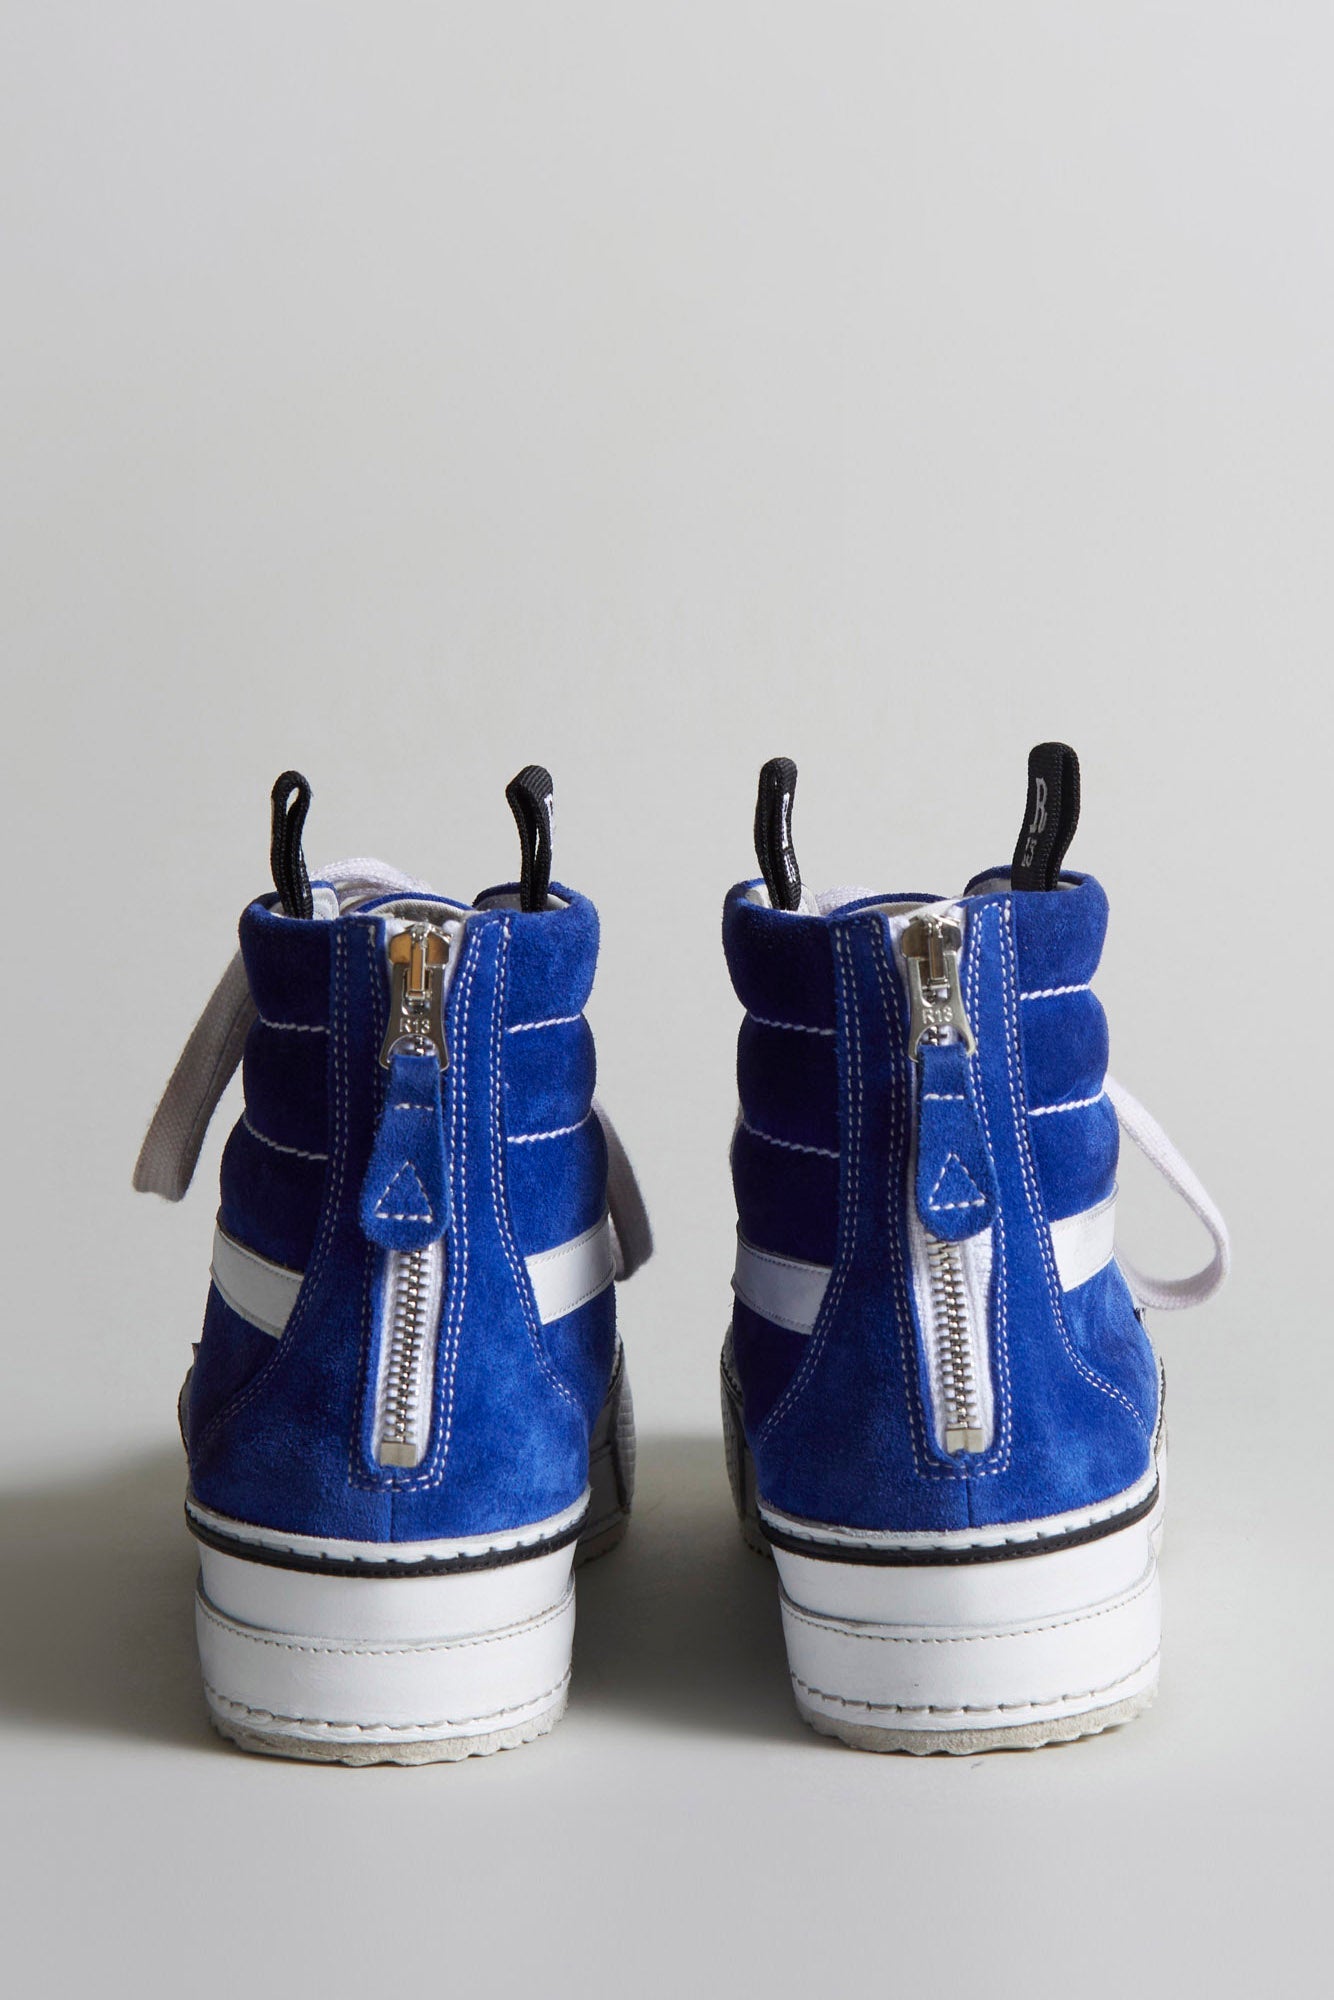 ROGUE HIGH TOP - BLUE SUEDE